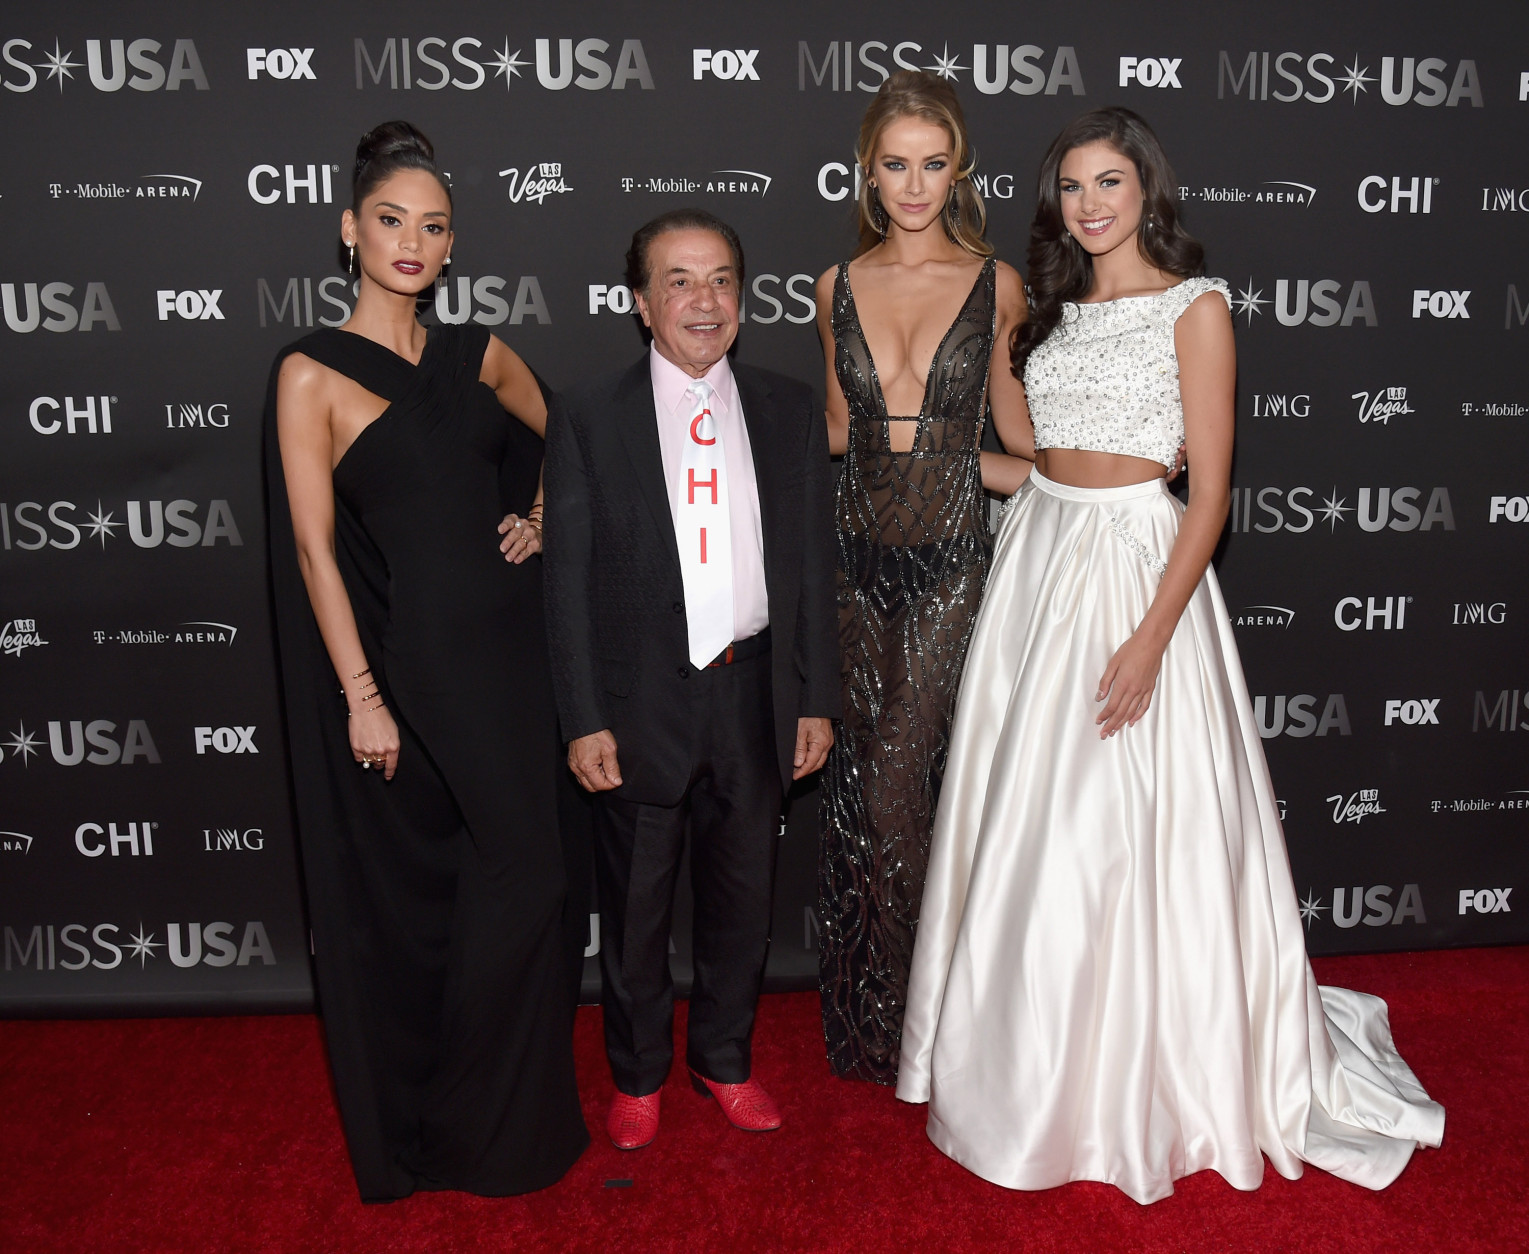 LAS VEGAS, NV - JUNE 05:  (L-R) Miss Universe 2015 Pia Wurtzbach, Farouk Systems founder Farouk Shami, Miss USA 2015 Olivia Jordan and Miss Teen USA 2015 Katherine Haik attend the 2016 Miss USA pageant at T-Mobile Arena on June 5, 2016 in Las Vegas, Nevada.  (Photo by Ethan Miller/Getty Images)